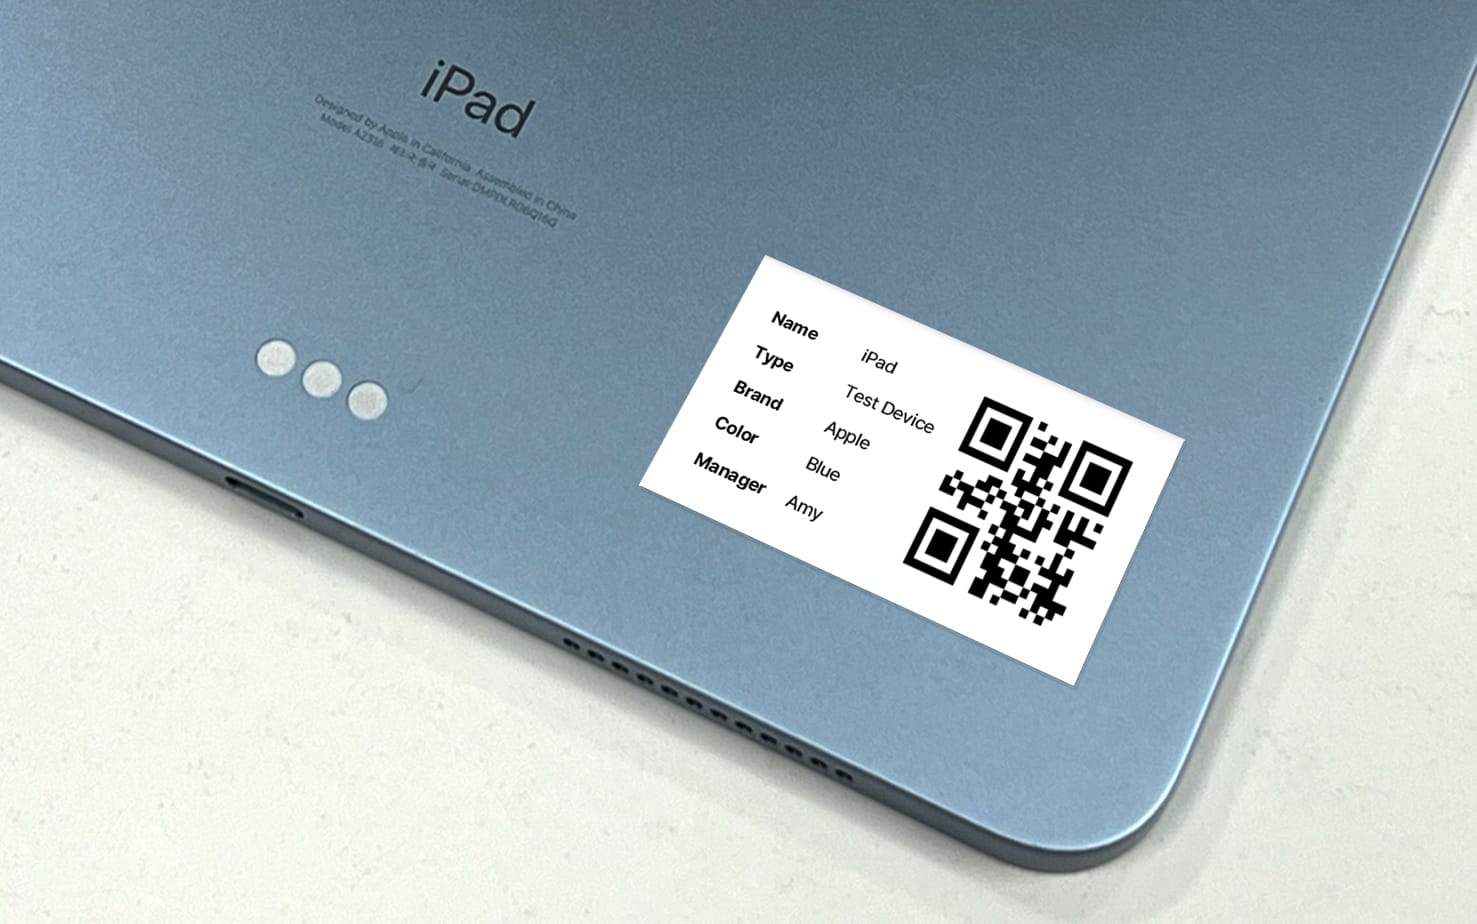 An iPad with a QR code label attached at its bottom right corner.